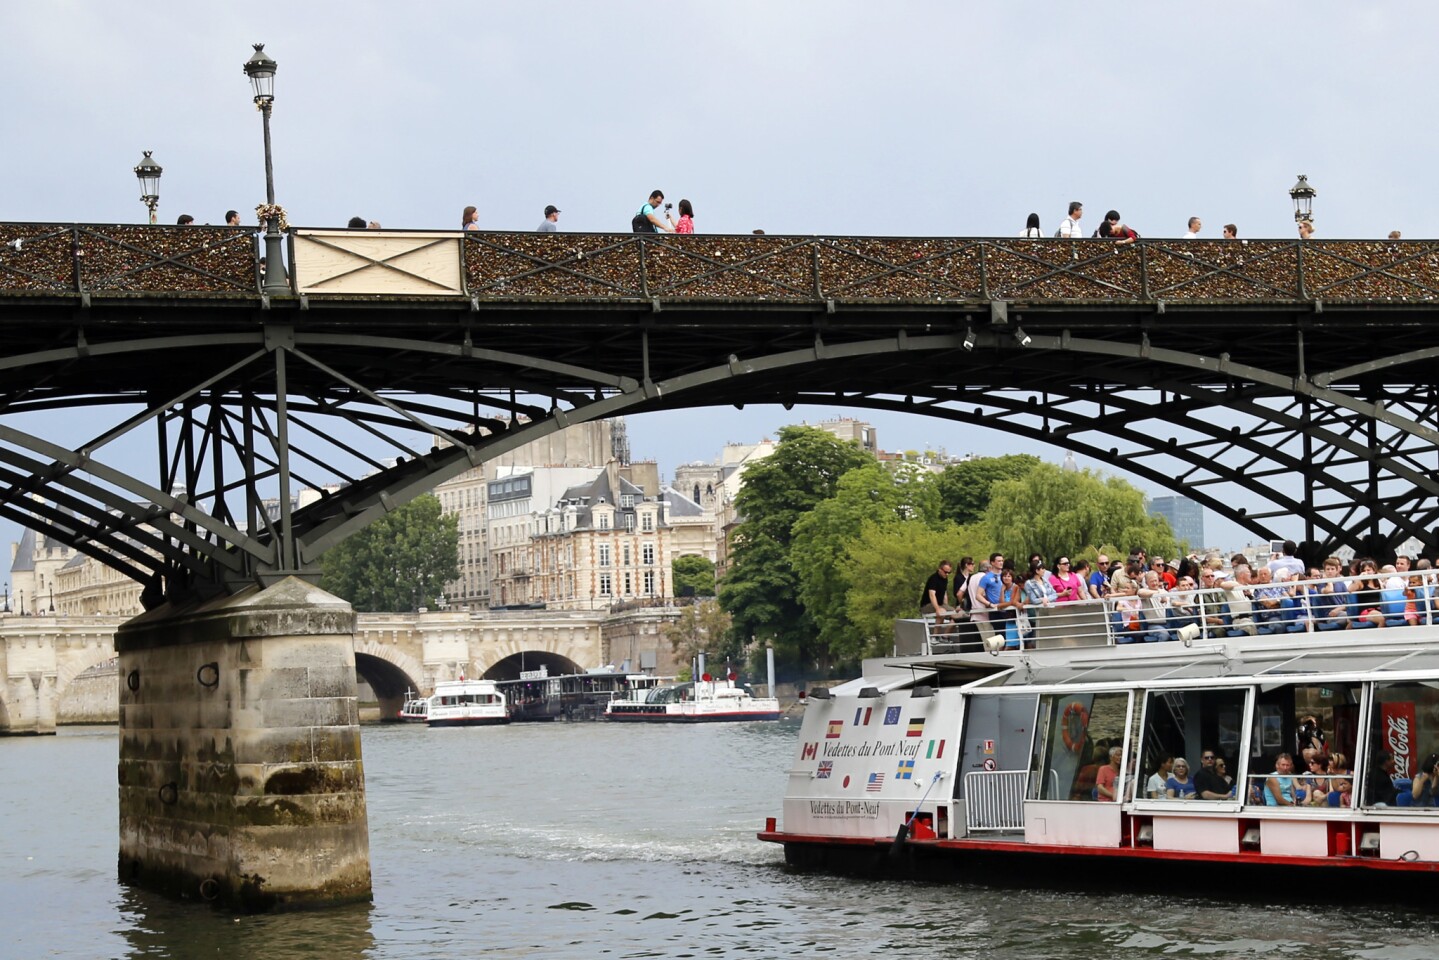 Part of the Pont des Arts collapsed Sunday because of the weight of the locks, according to media reports. The wooden panel was put up temporarily.